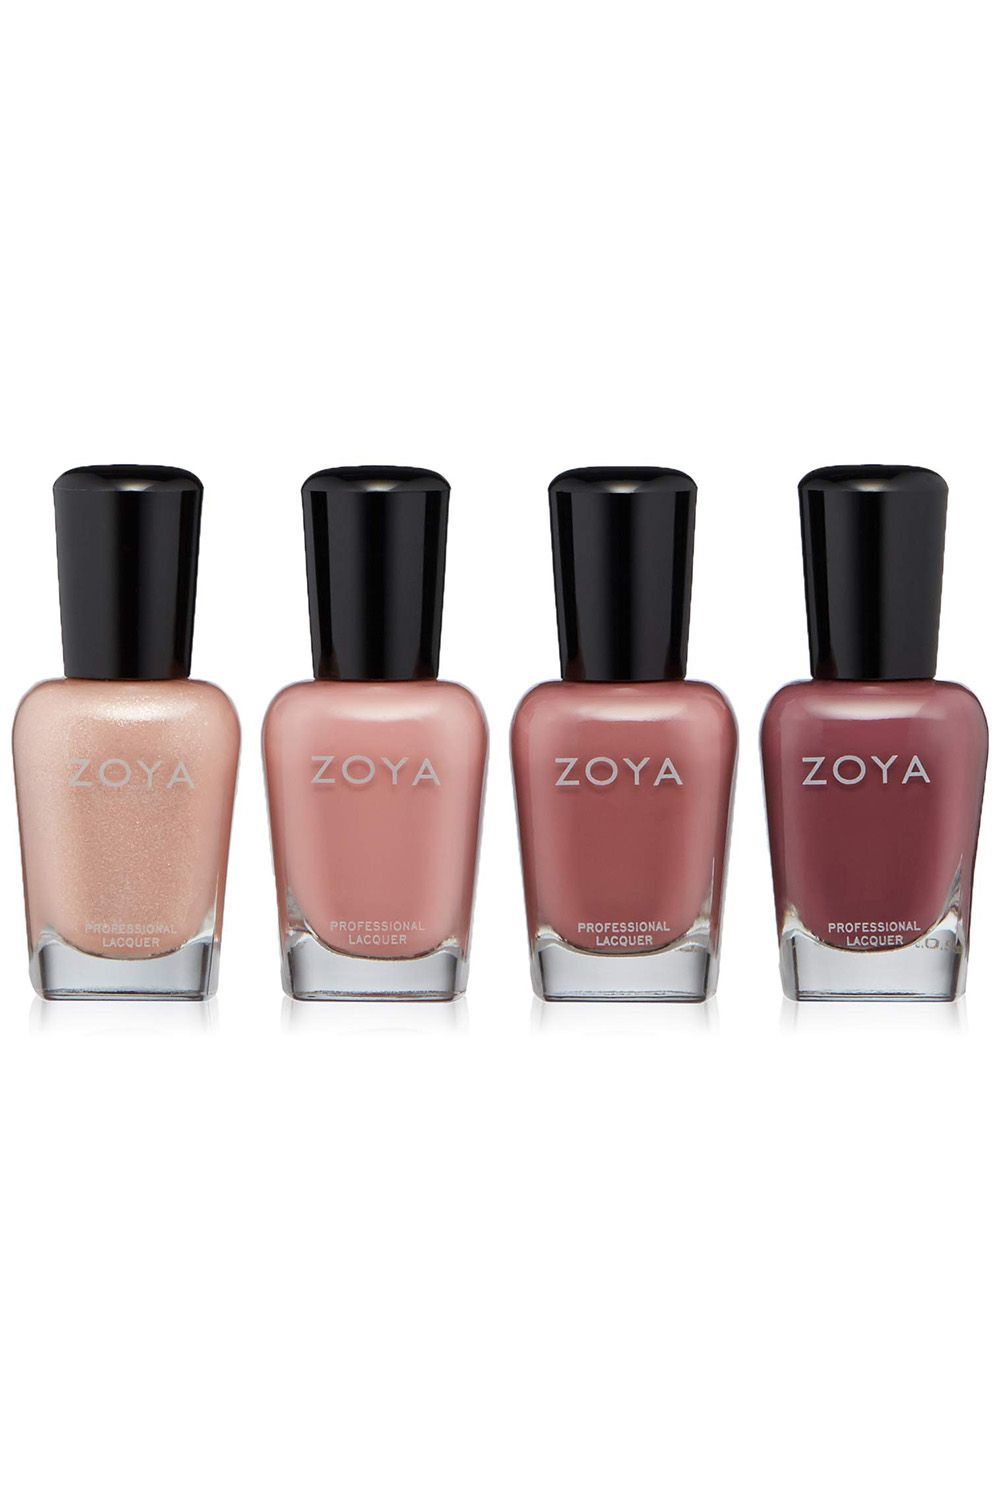 10 Best Nail Polish Brands of 2022 - Best Nail Colors and Formulas